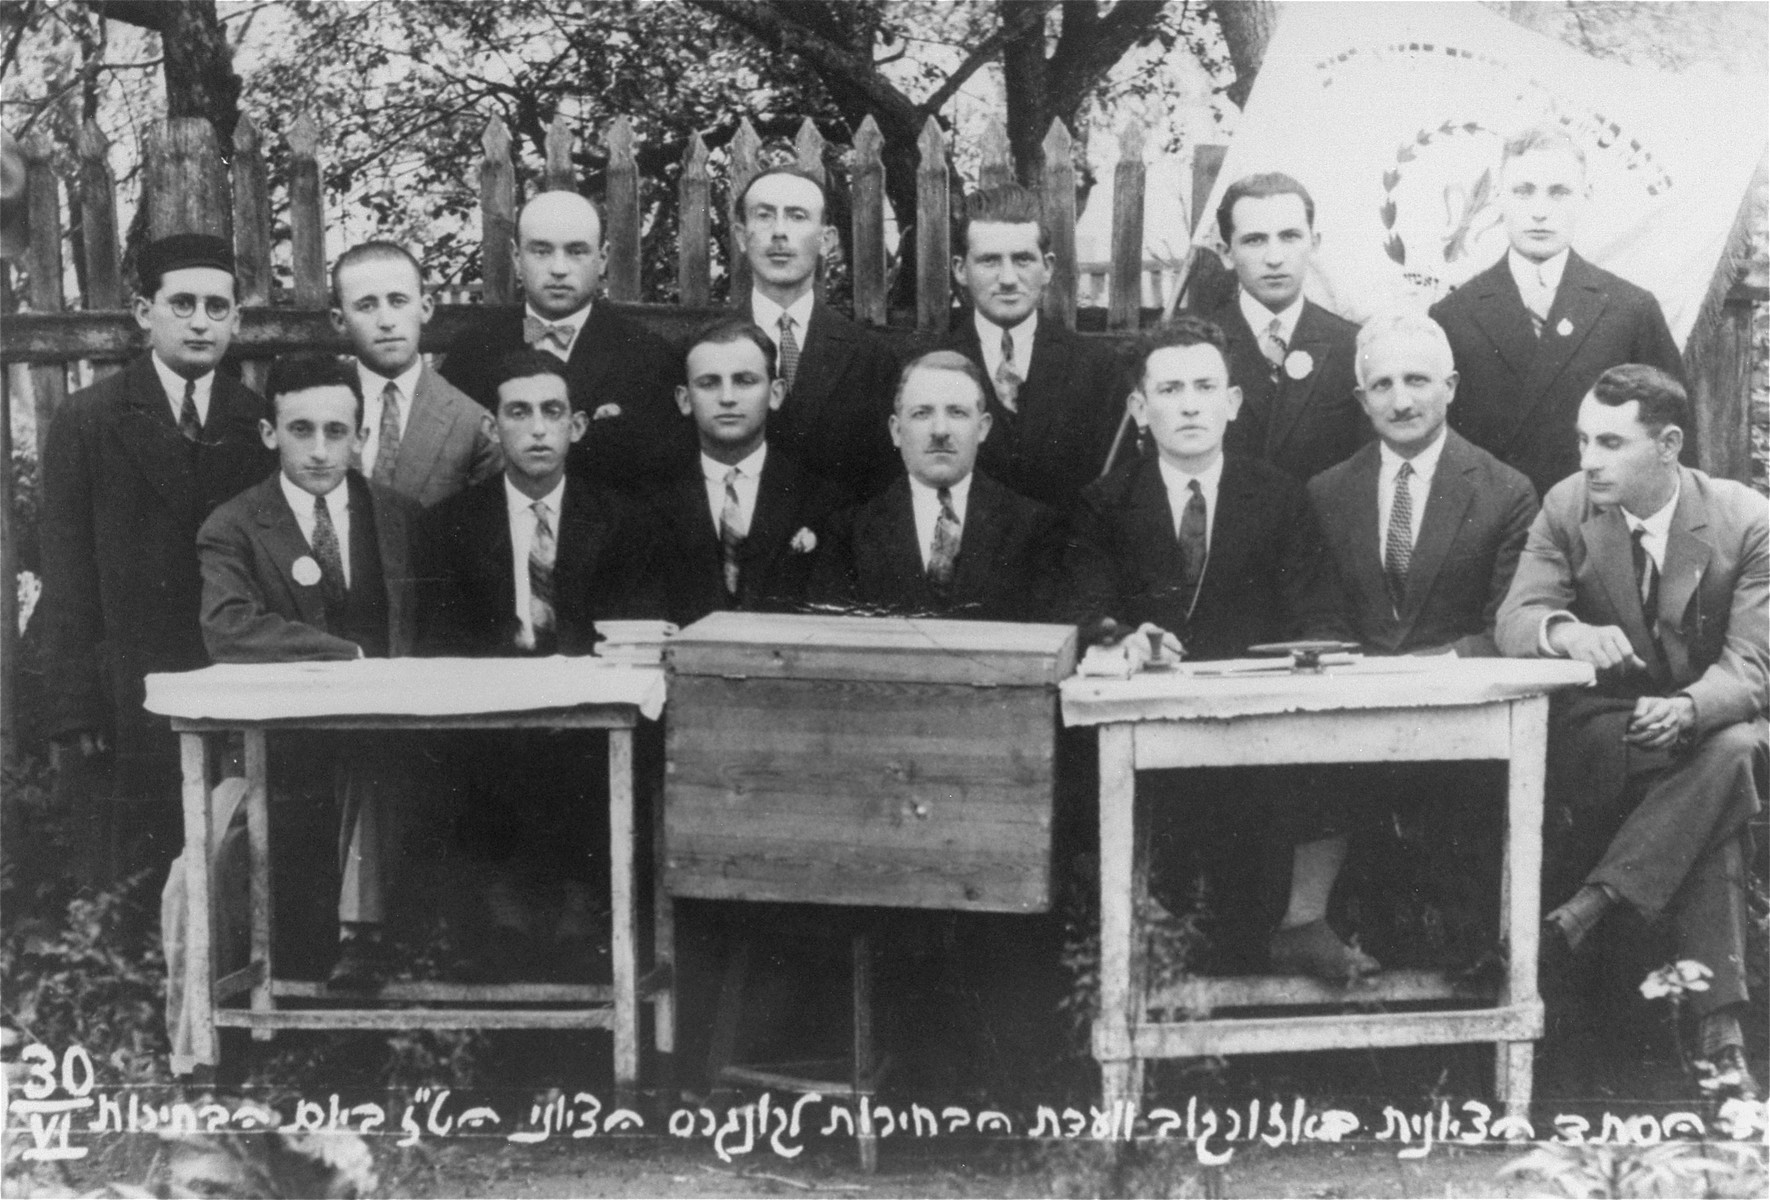 Group portrait of members of the Ozorkow election committee for the 16th Zionist Congress. 

Among those pictured are: Mayer Zabner, the donor's uncle (front row, second from the right), Mr. Feldman (front row, right), Mr. Winter (front row, center), Mr. Rosenblum (front row, left).